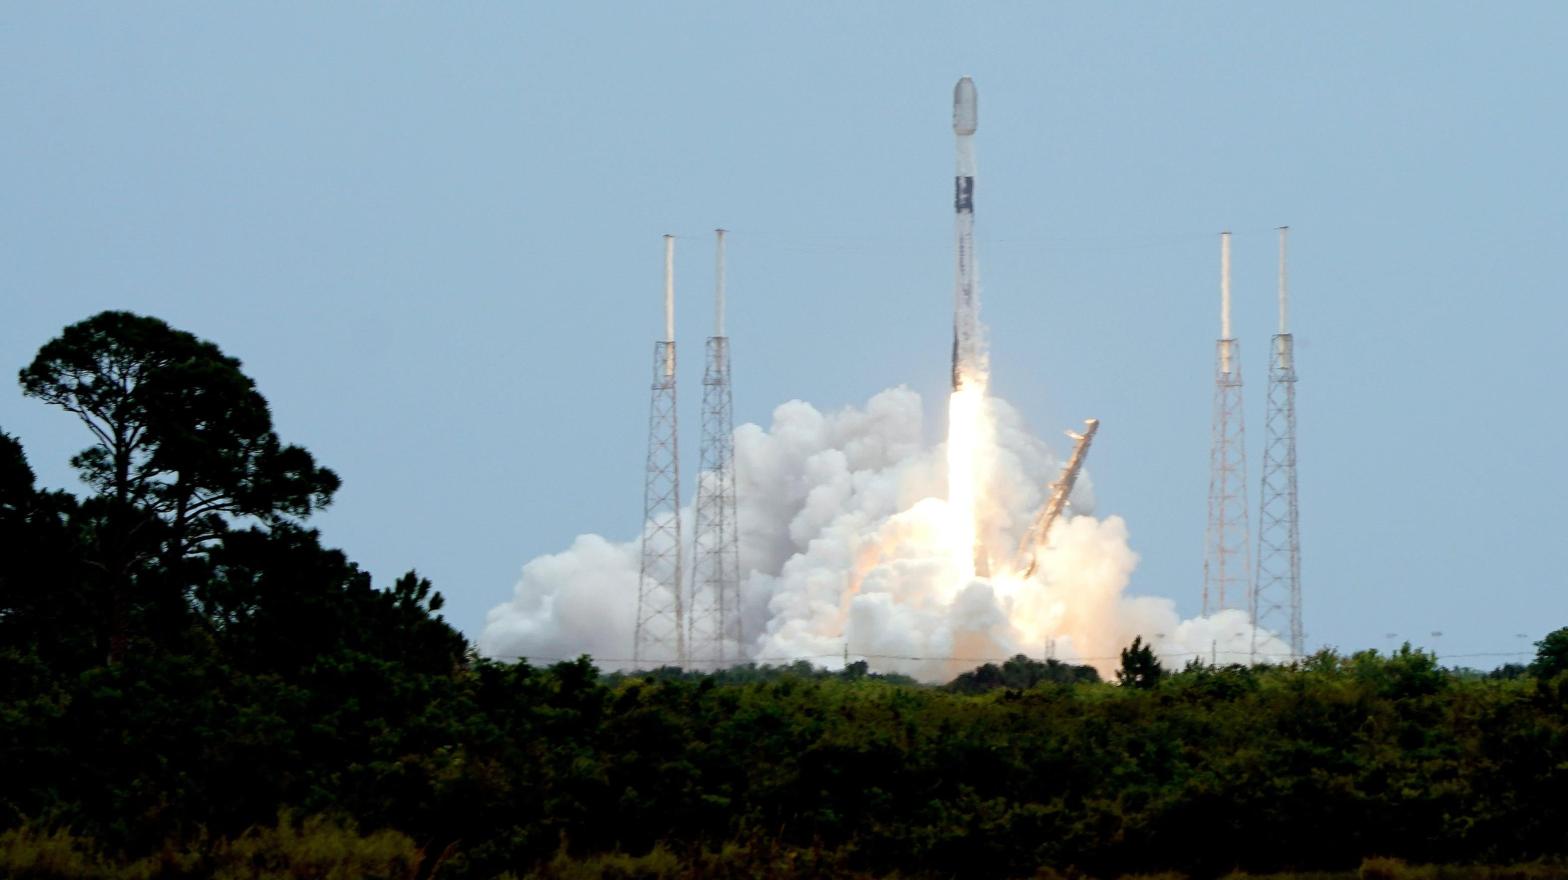 SpaceX has launched more than 2,000 Starlink satellites to orbit as part of its internet megaconstellation. (Photo: John Raoux, AP)